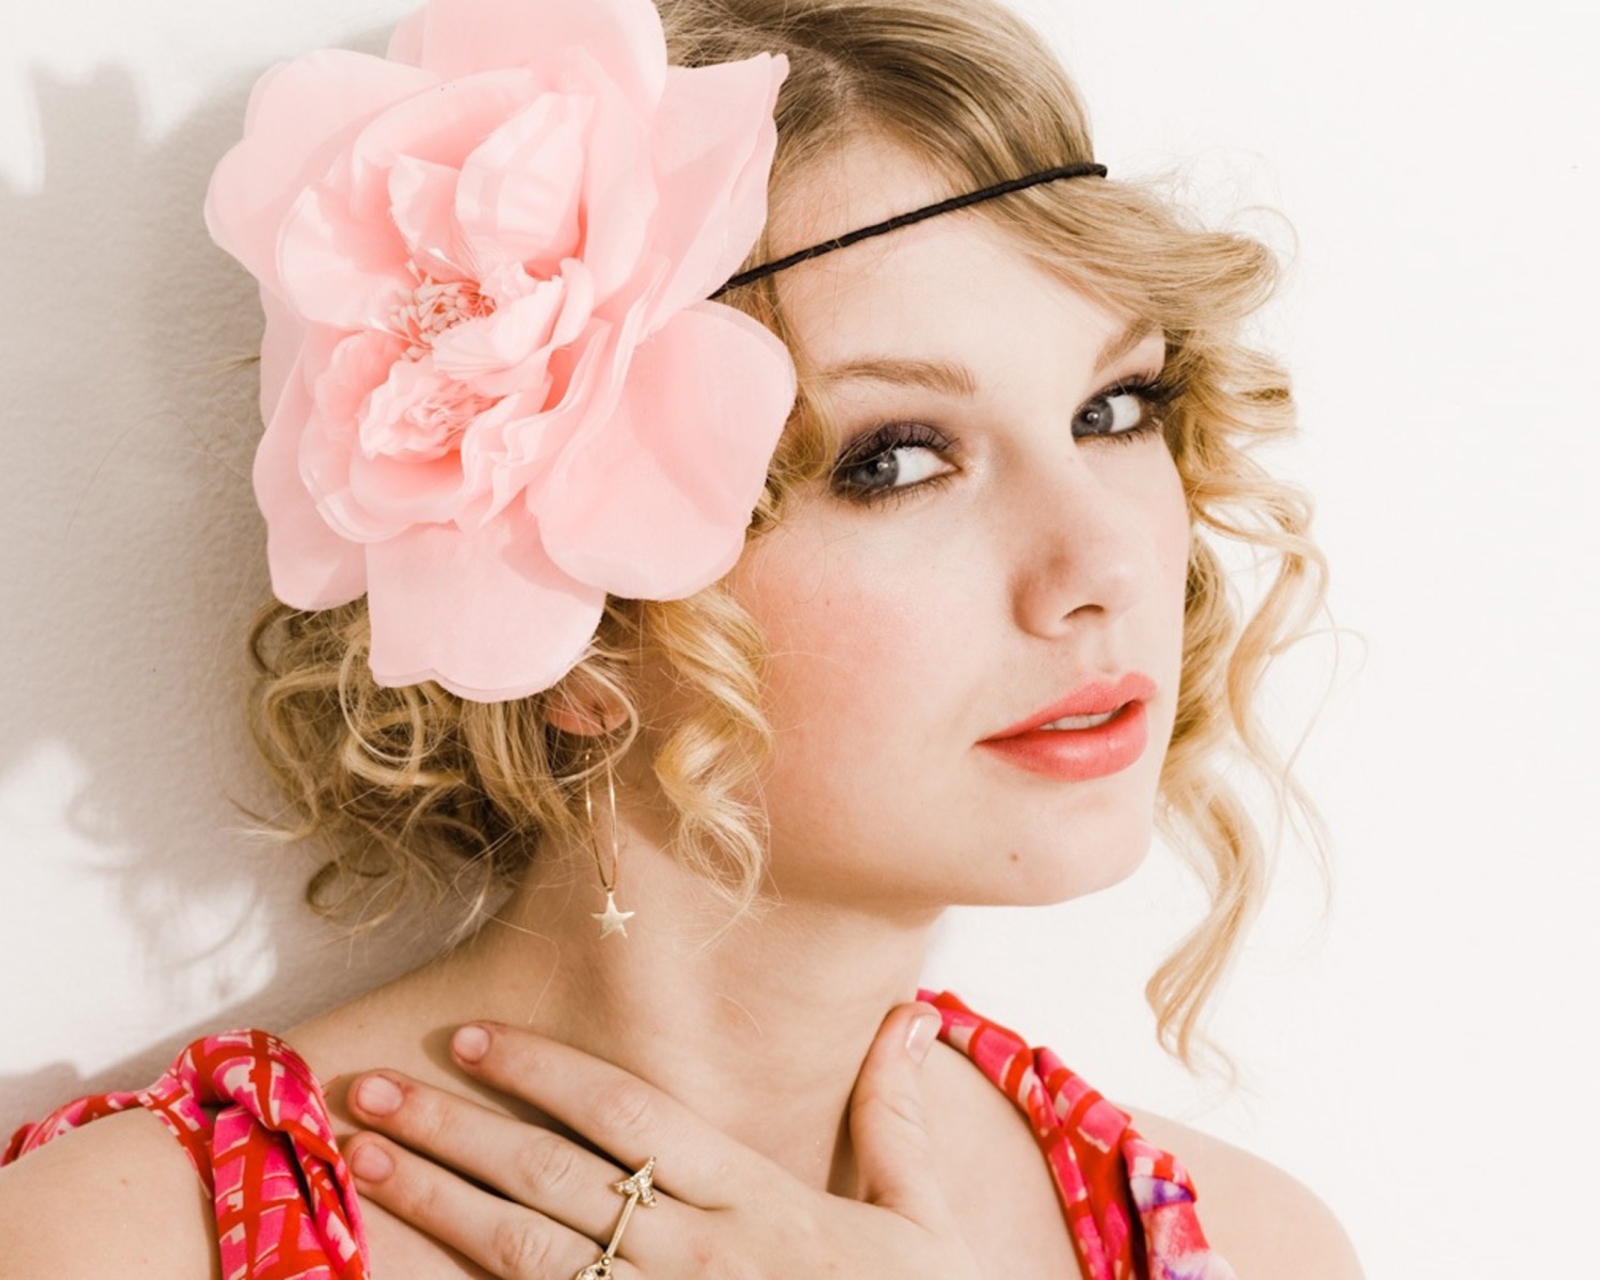 Taylor Swift With Pink Rose On Head screenshot #1 1600x1280